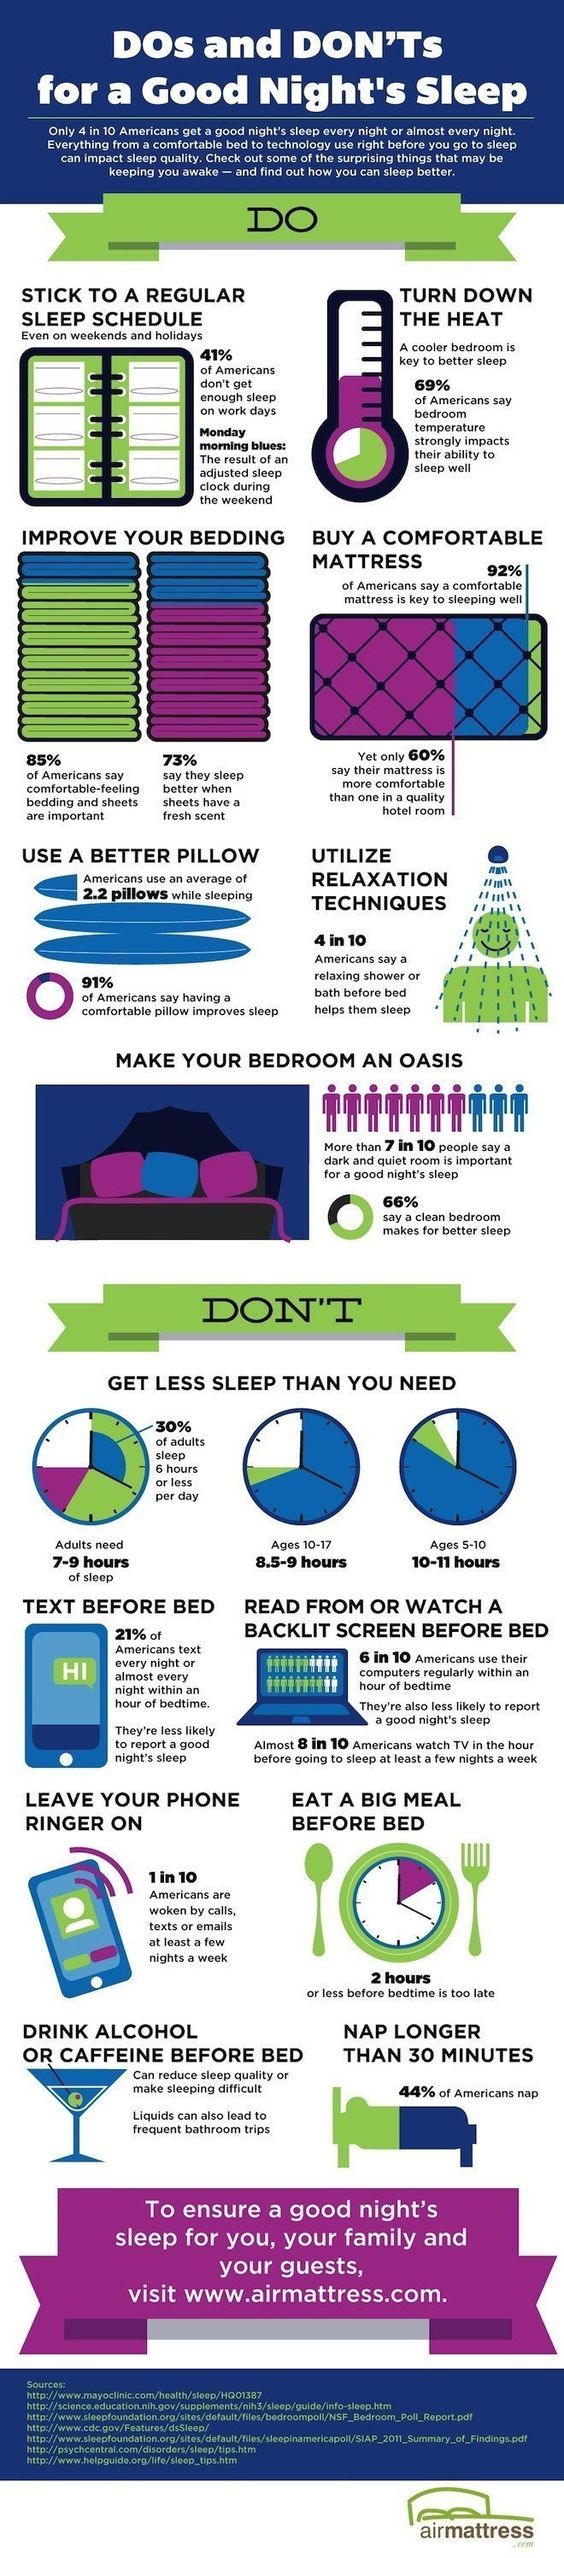 Sleep | Tipsographic | More sleep tips at http://www.tipsographic.com/